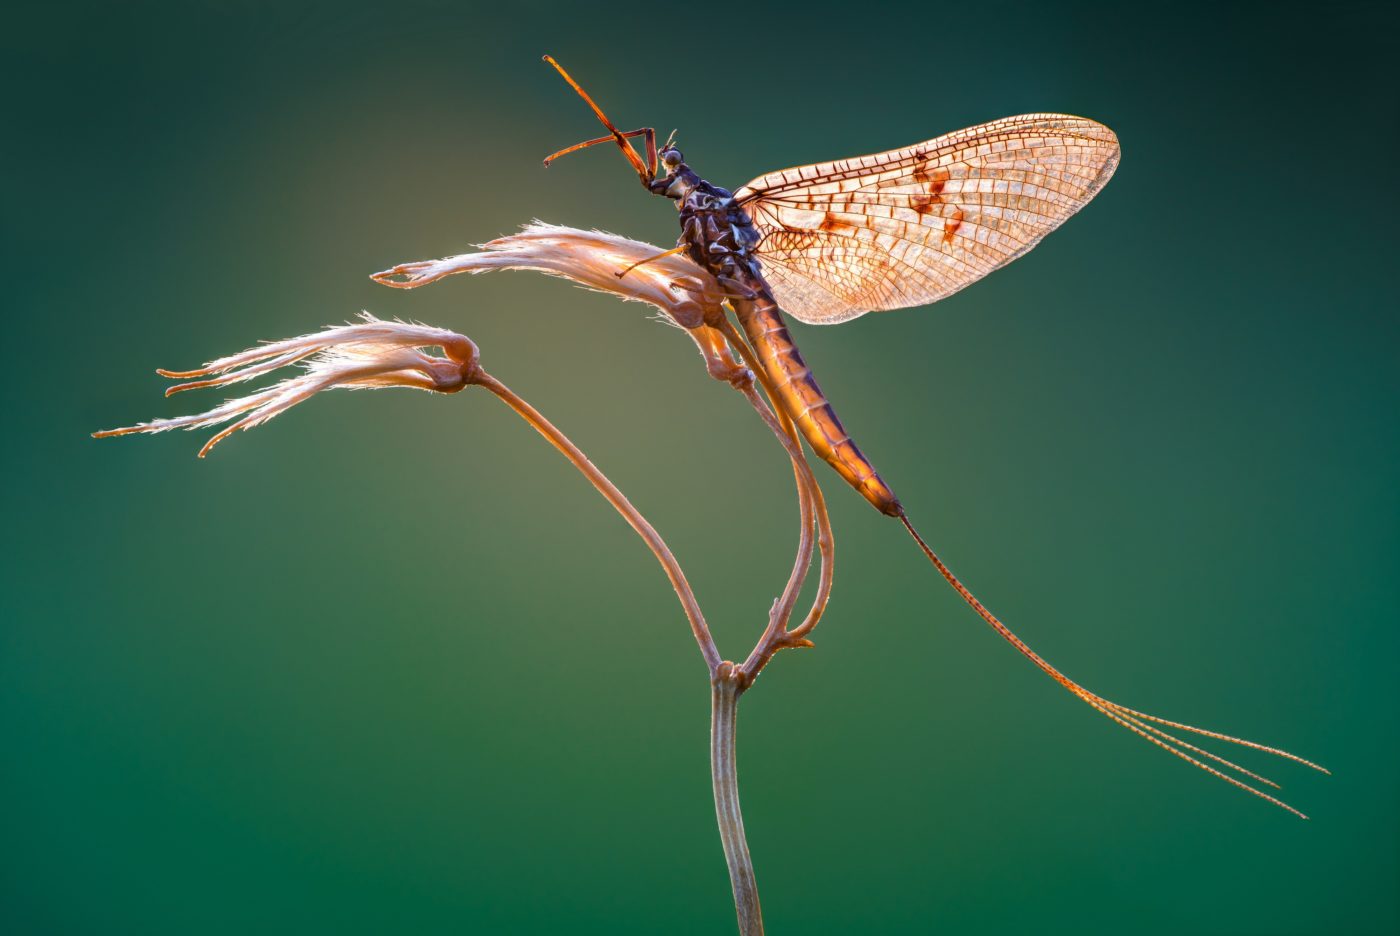 Mayfly resting on a stem in the early morning, just before sunrise